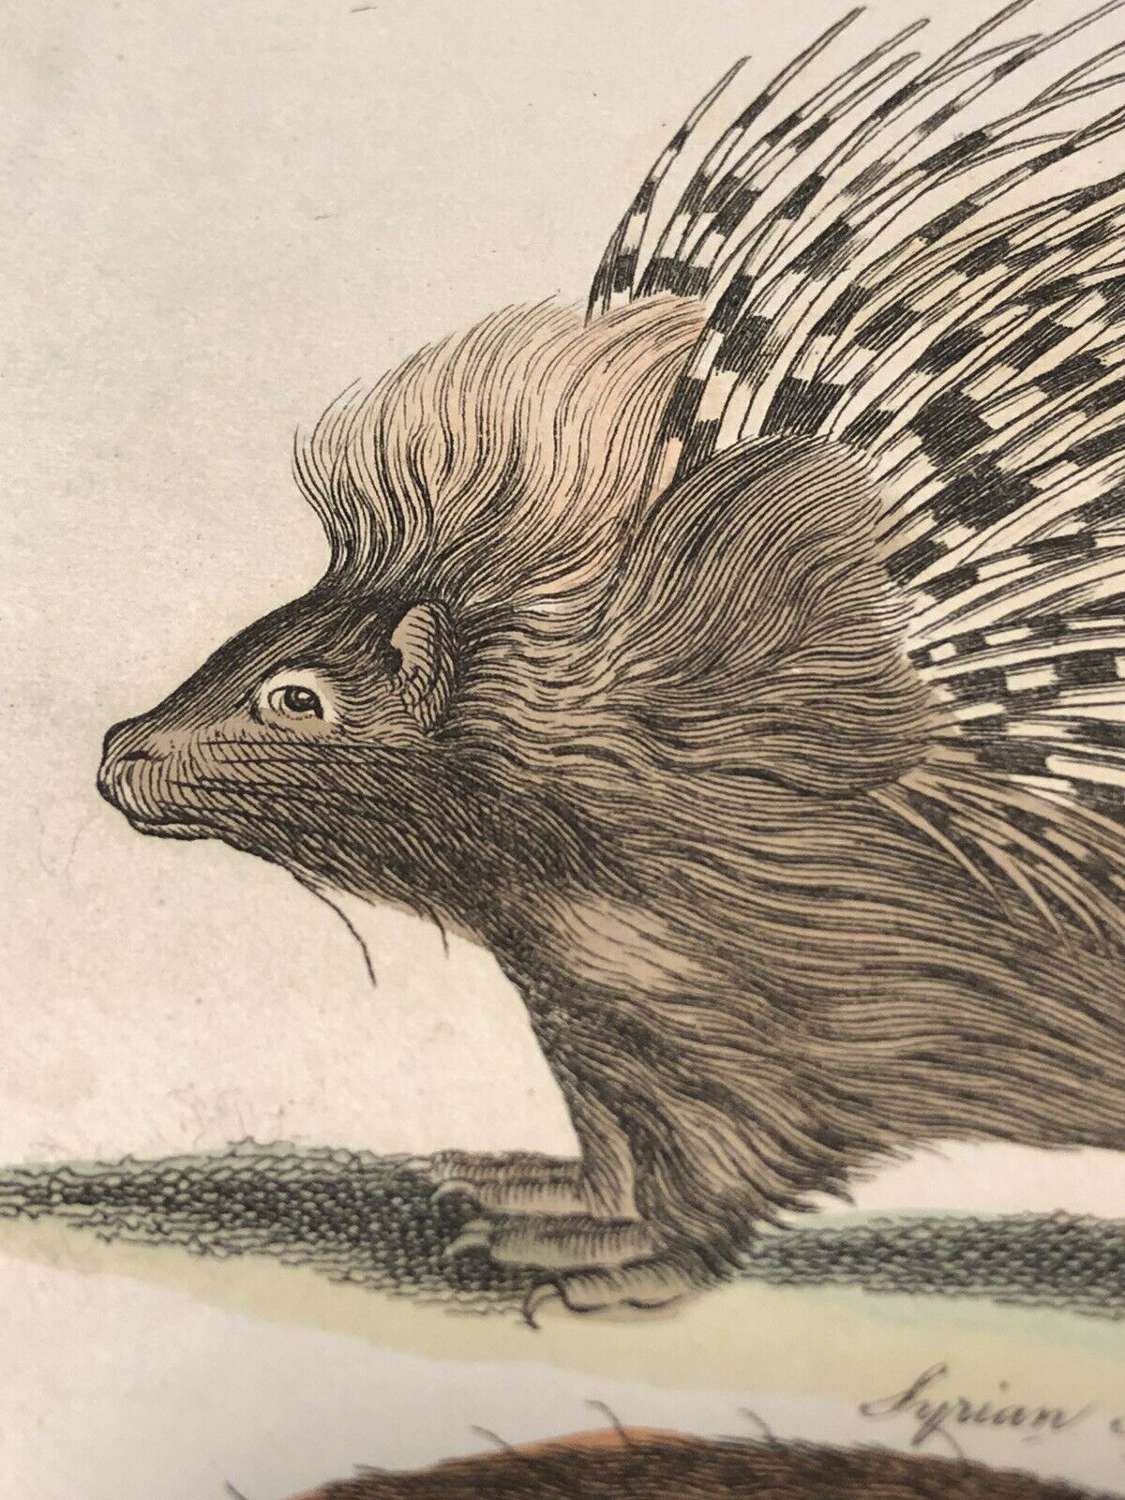 Antique lithograph of the Porcupine by George Kearsley